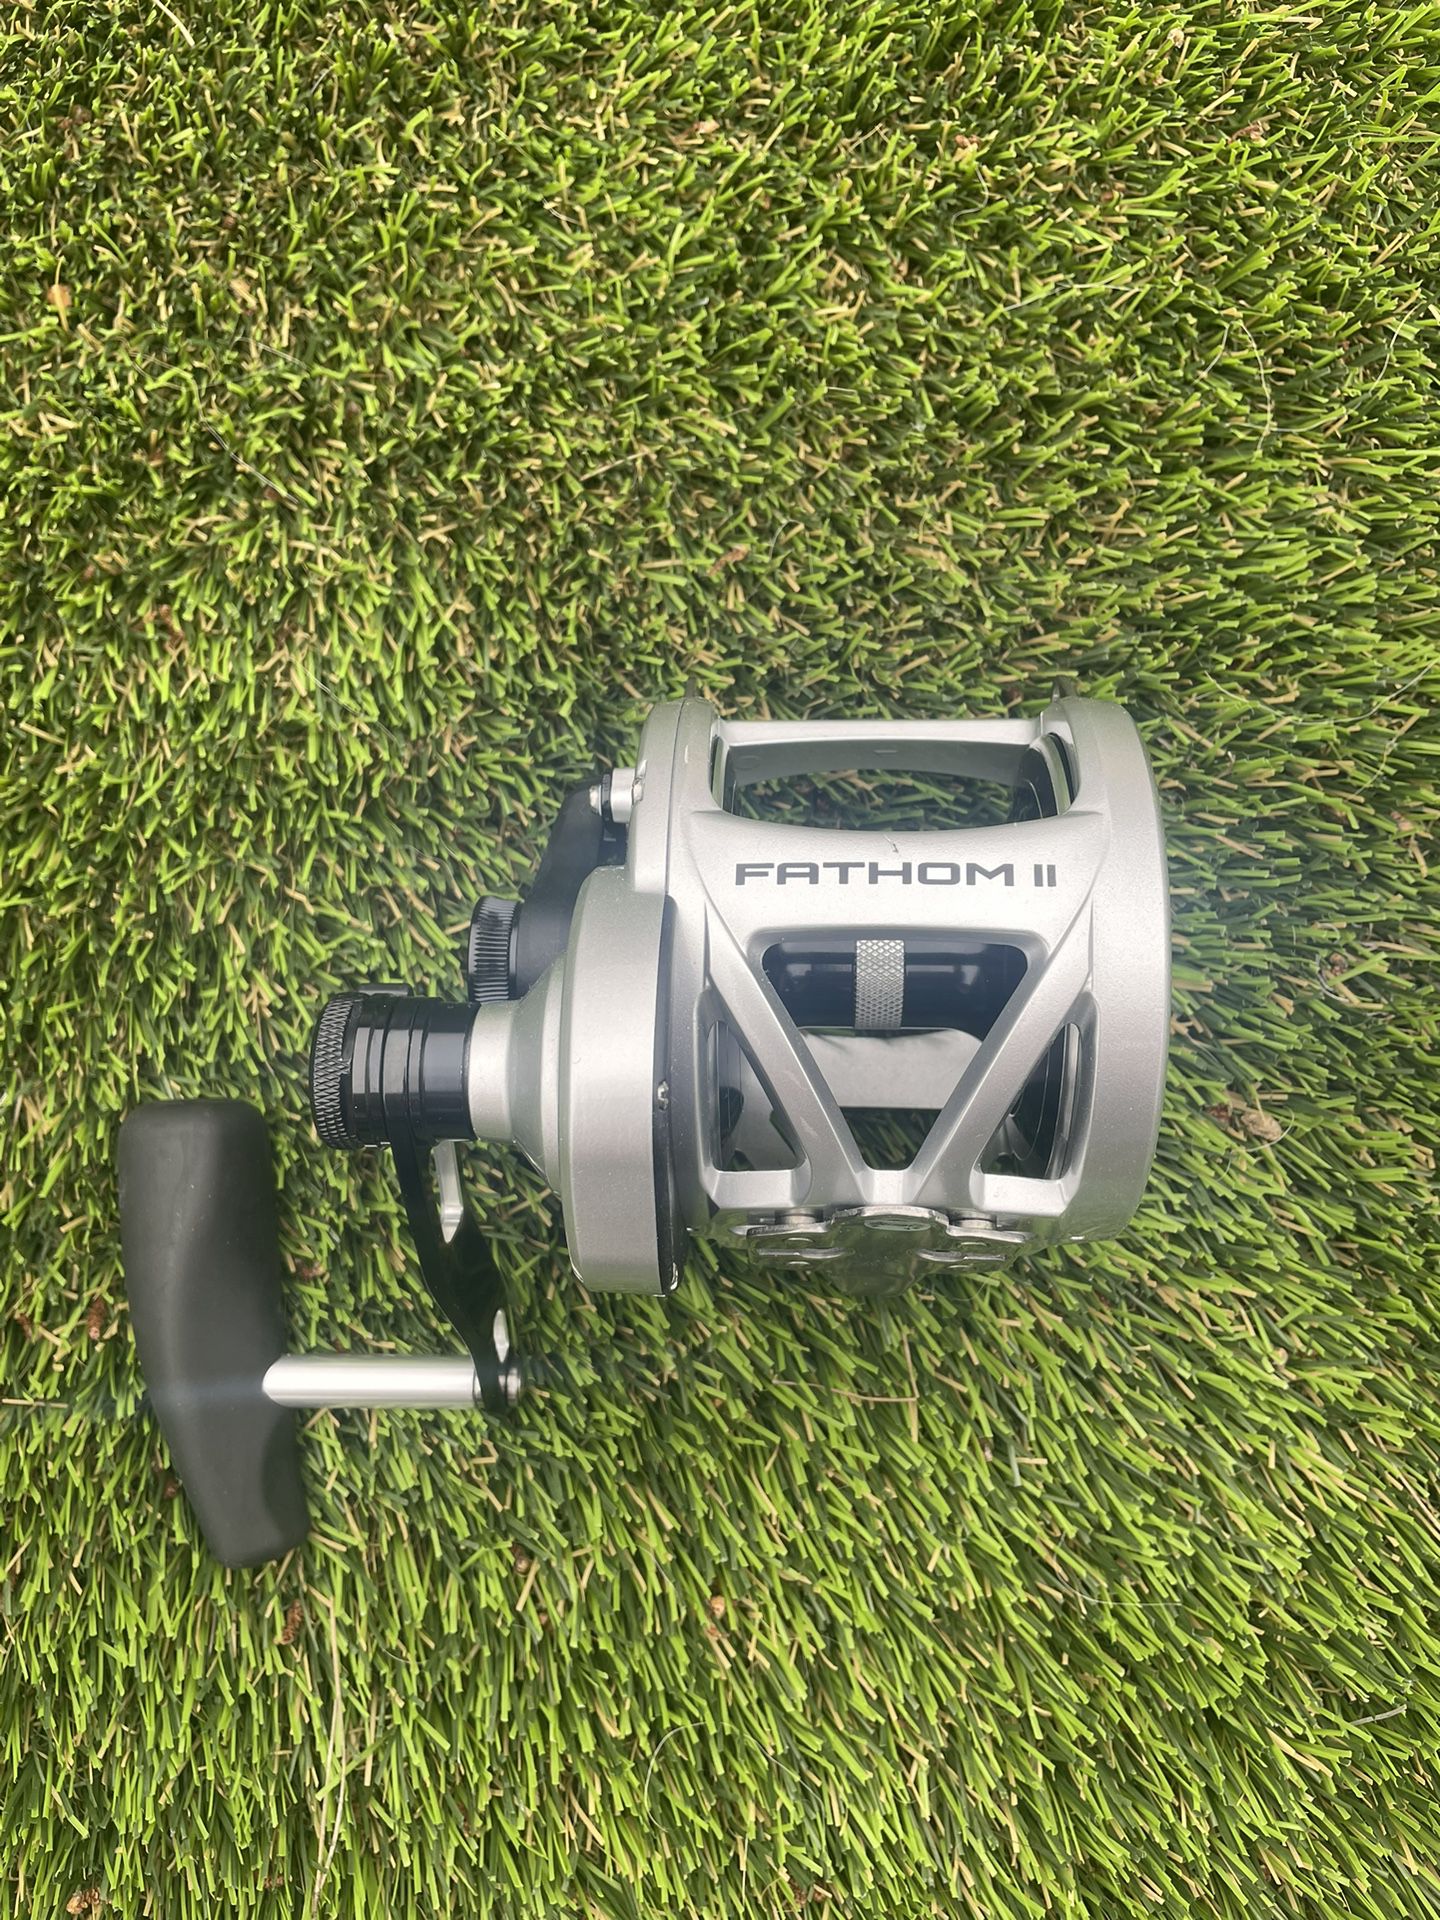 Penn Fathom 80 Reel for Sale in Spring Valley, CA - OfferUp